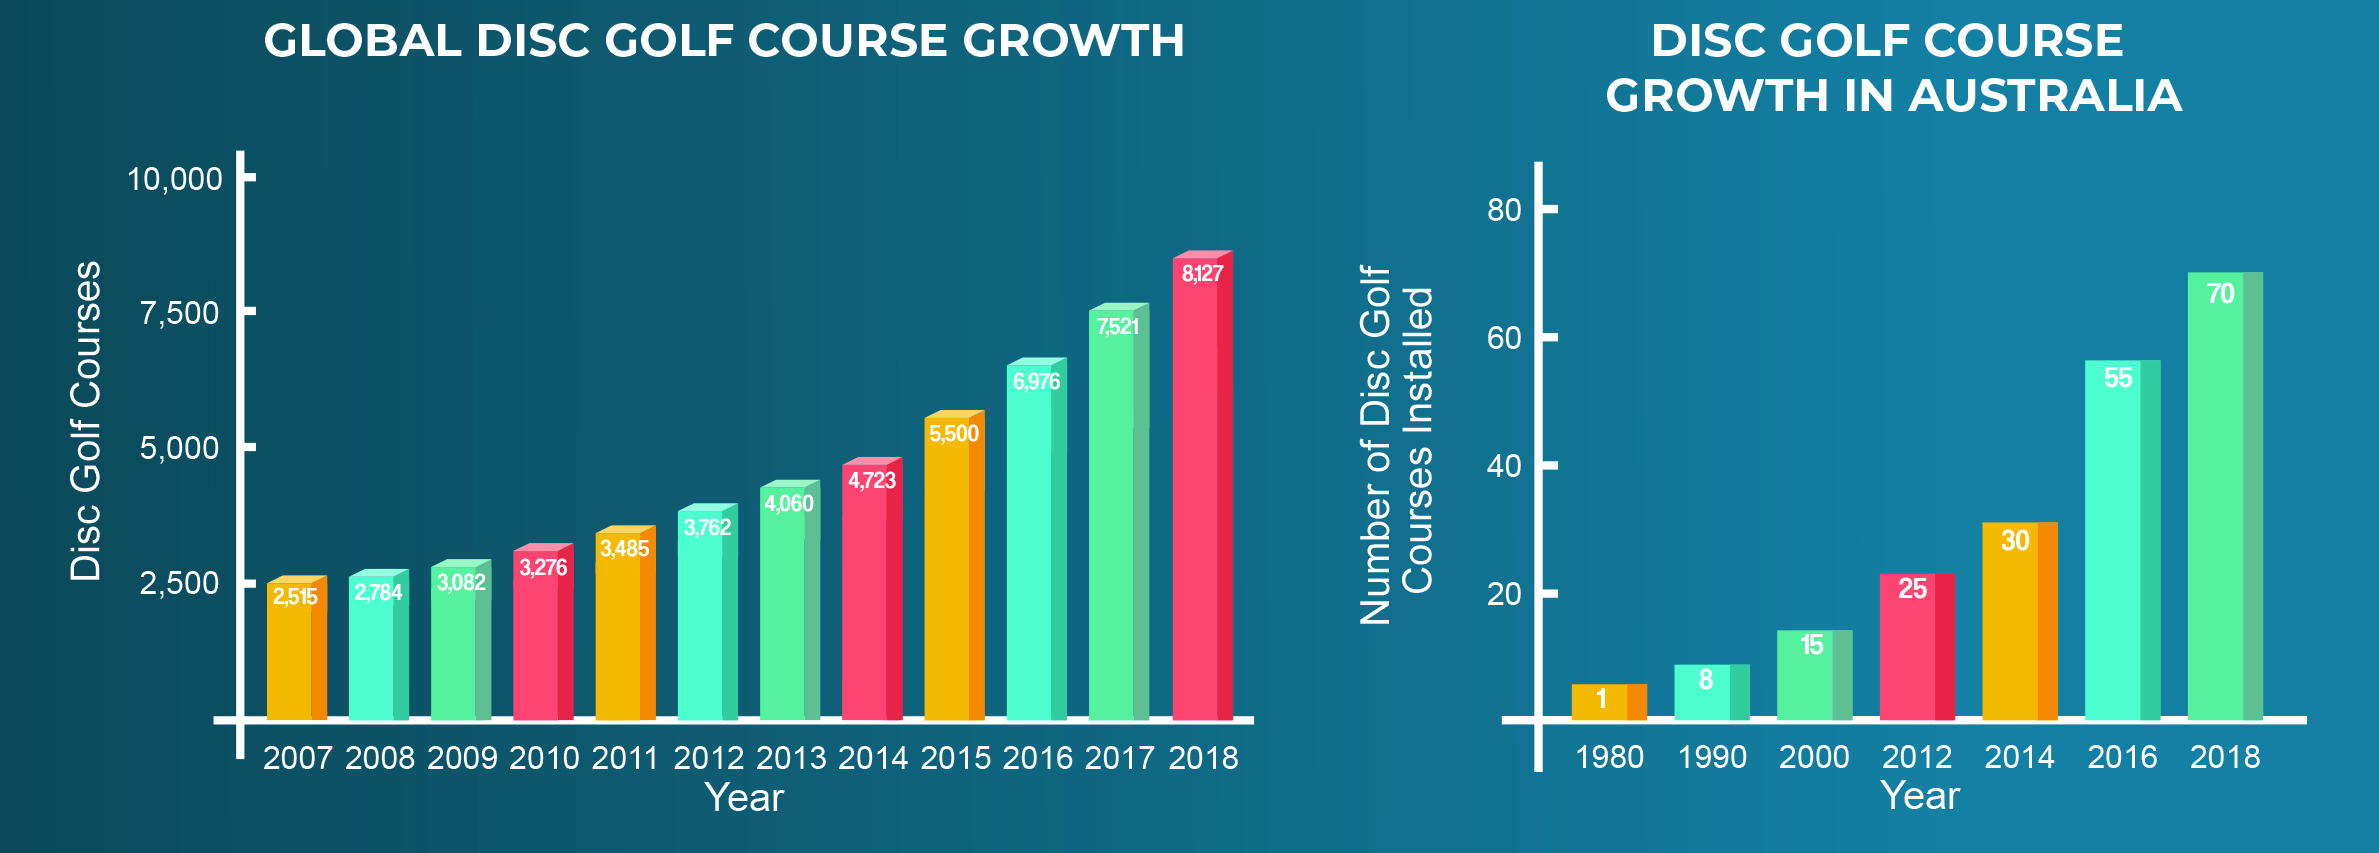 an image of the global disc golf course growth chart